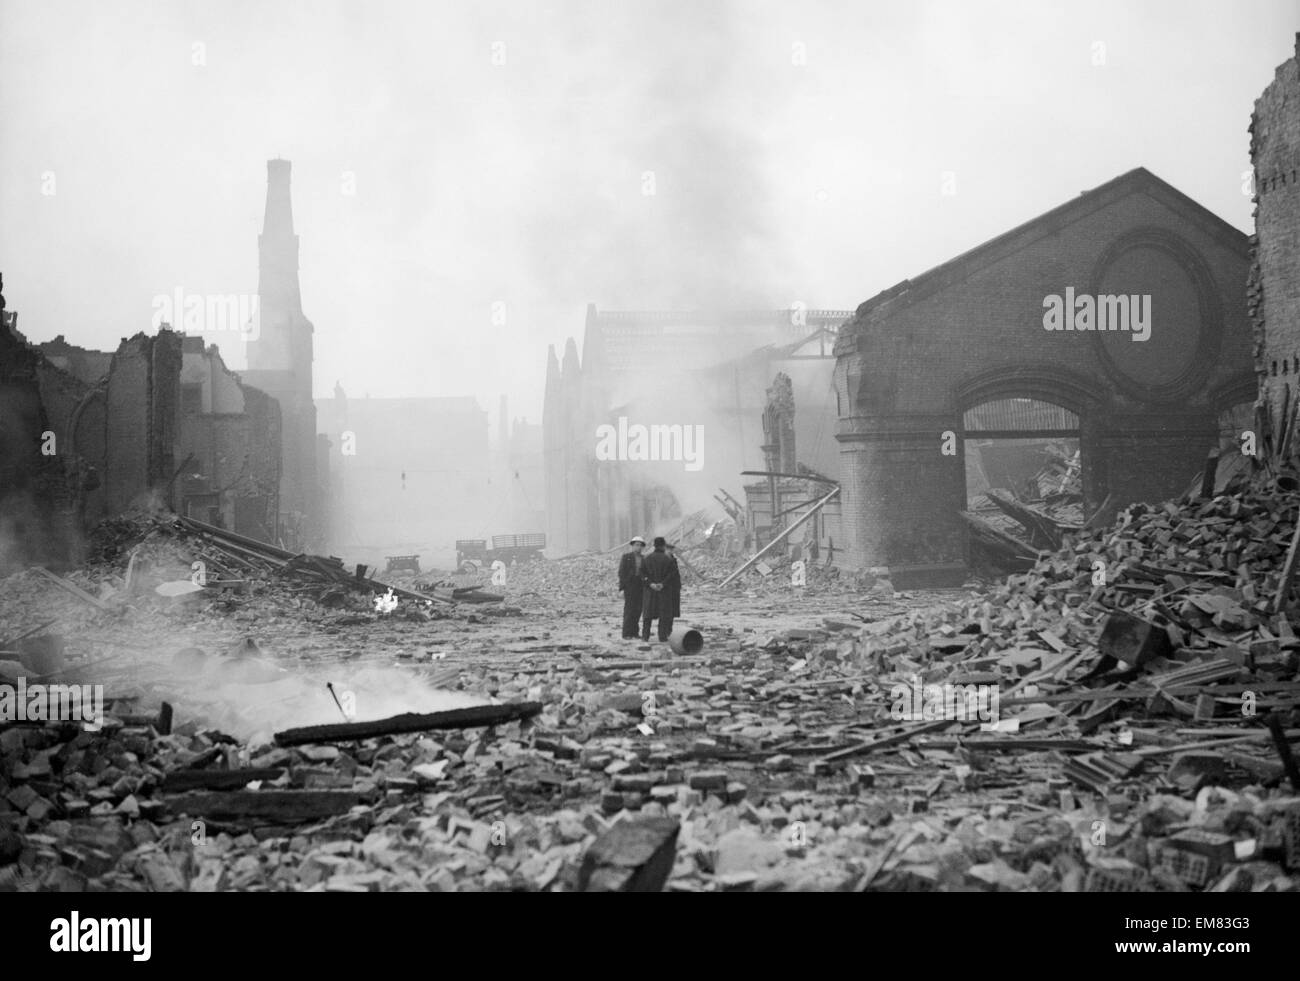 Bomb damage at Liverpool. Two people survey the damage caused by an air raid during World War Two. Circa 1940. Stock Photo